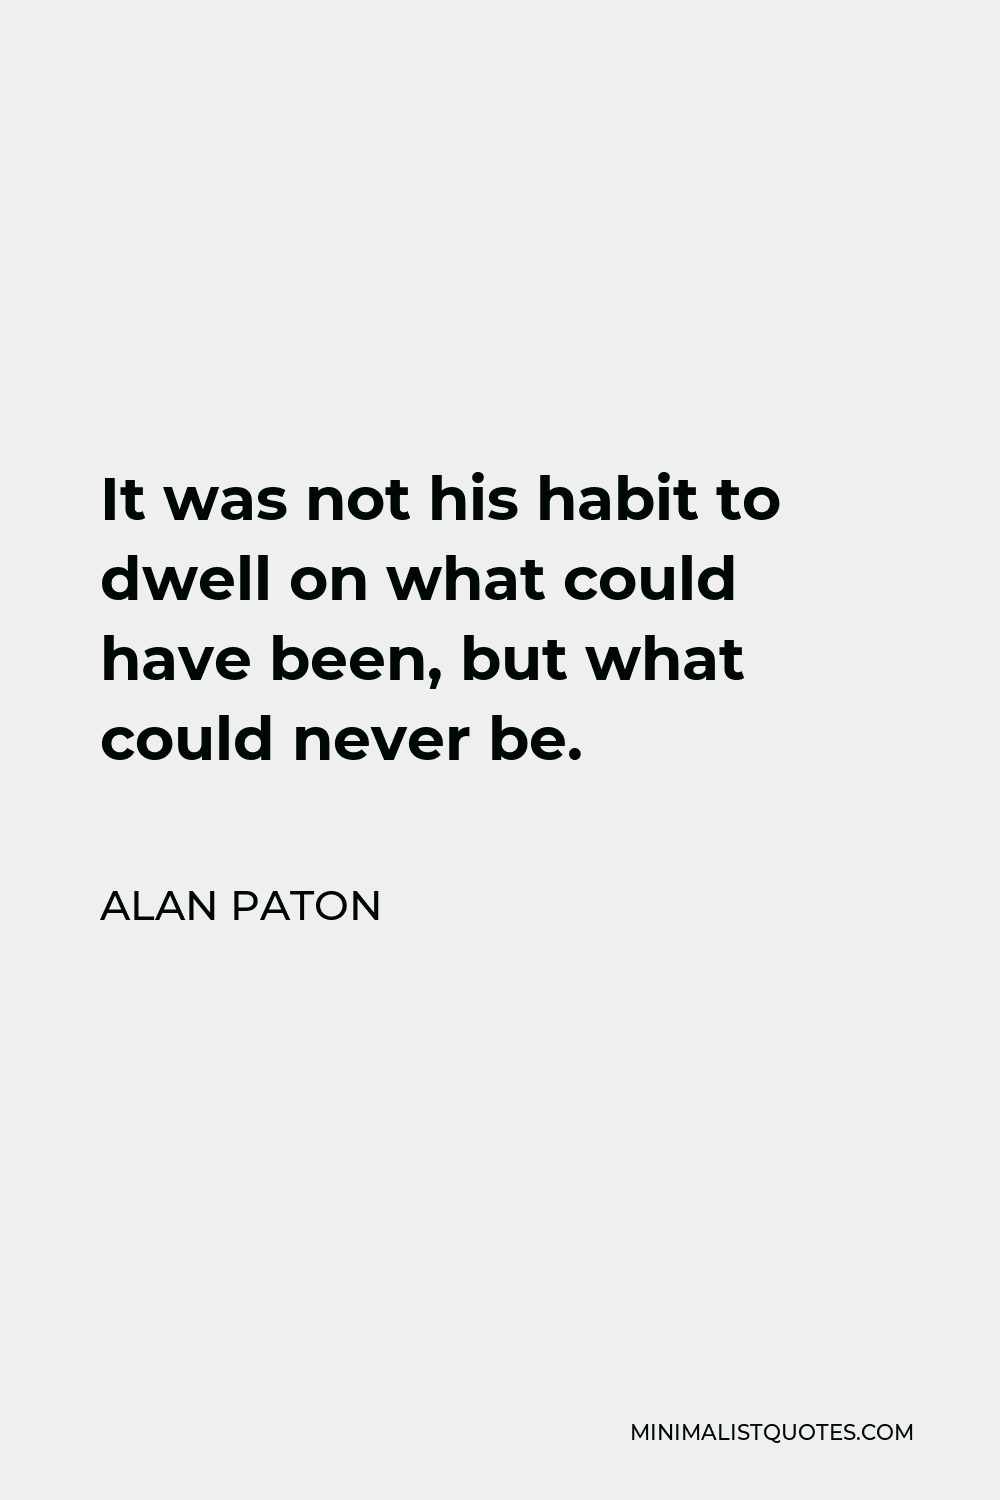 Alan Paton Quote - It was not his habit to dwell on what could have been, but what could never be.